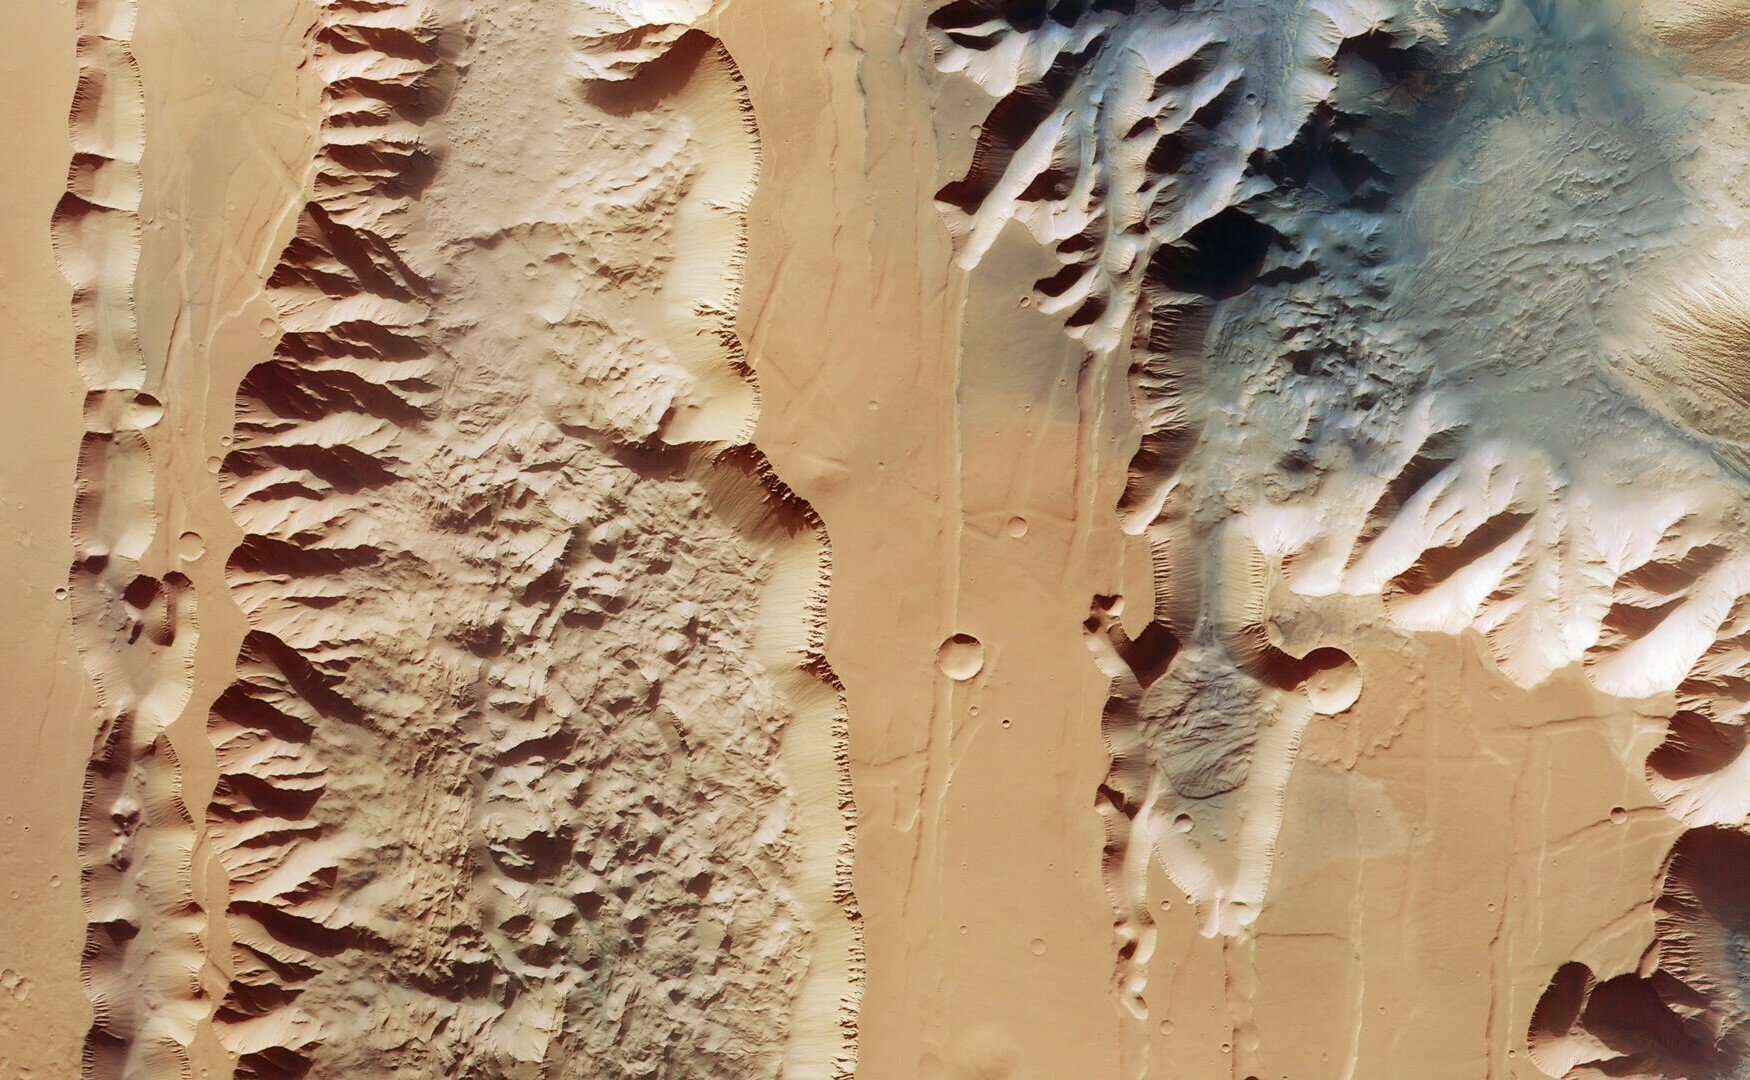 Two great chasms in Mars' Valles Marineris canyon.